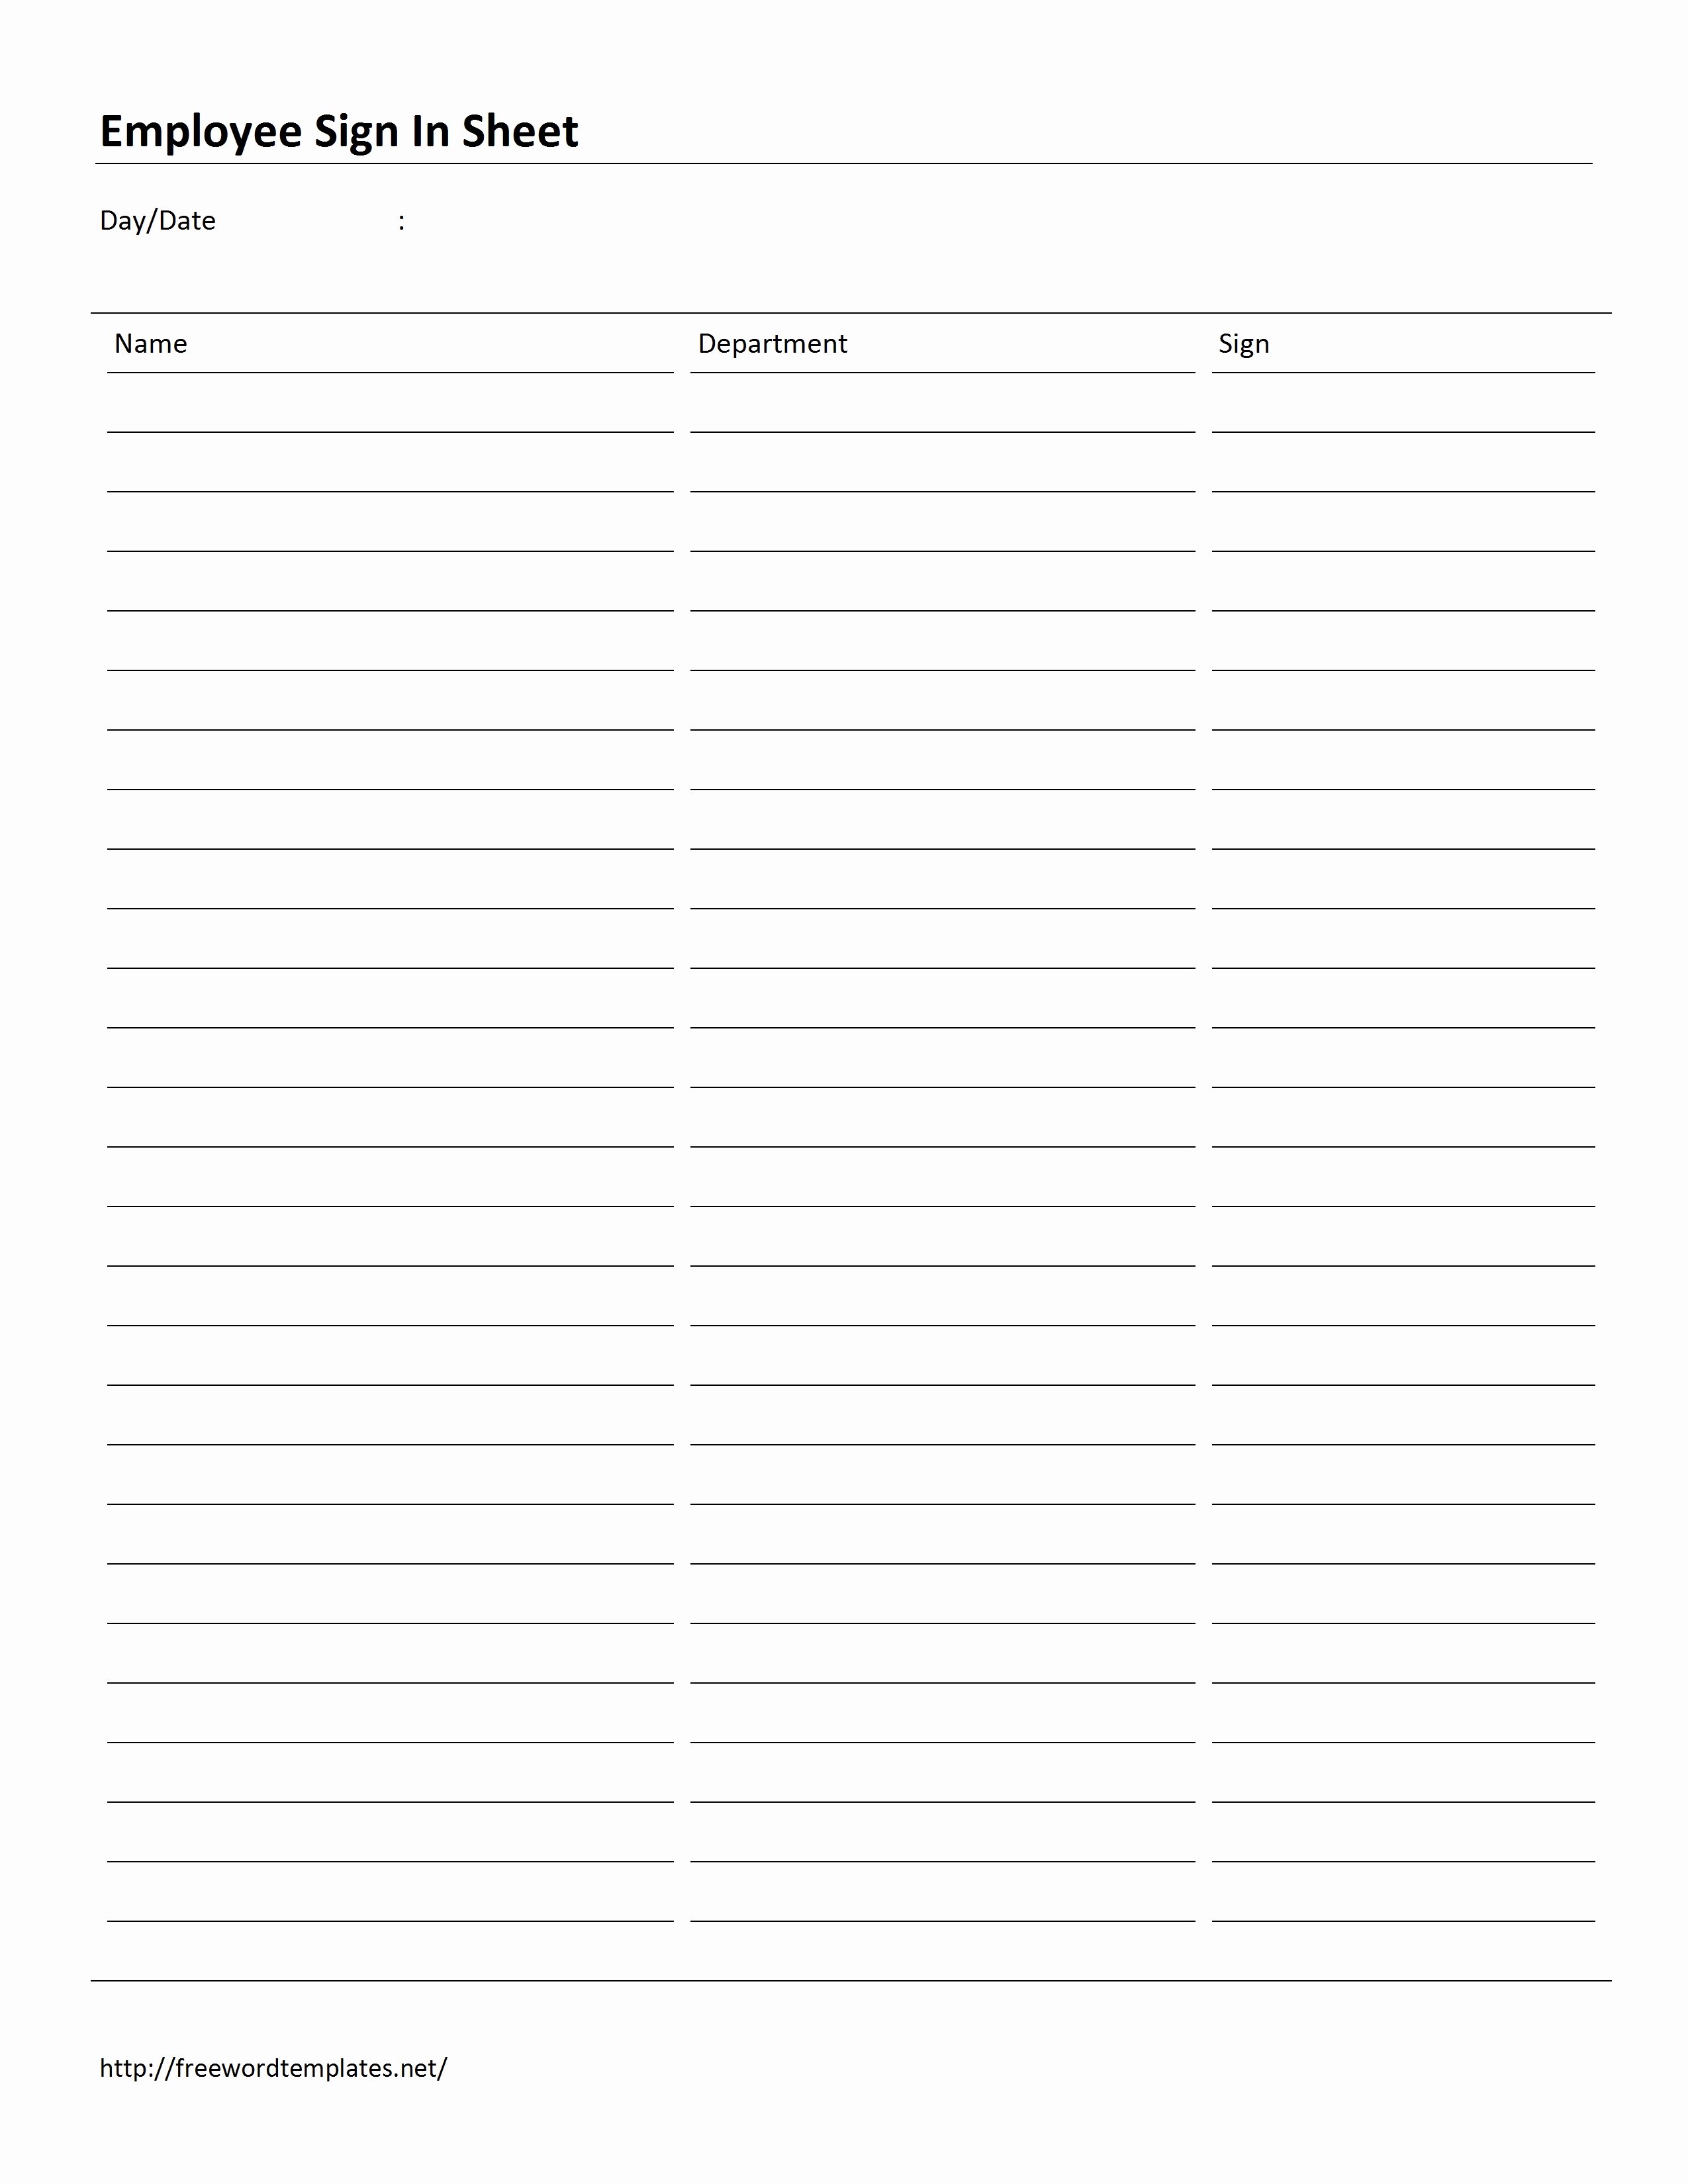 Employee Sign In Sheets Fresh Employee attendance Sign In Sheet Template